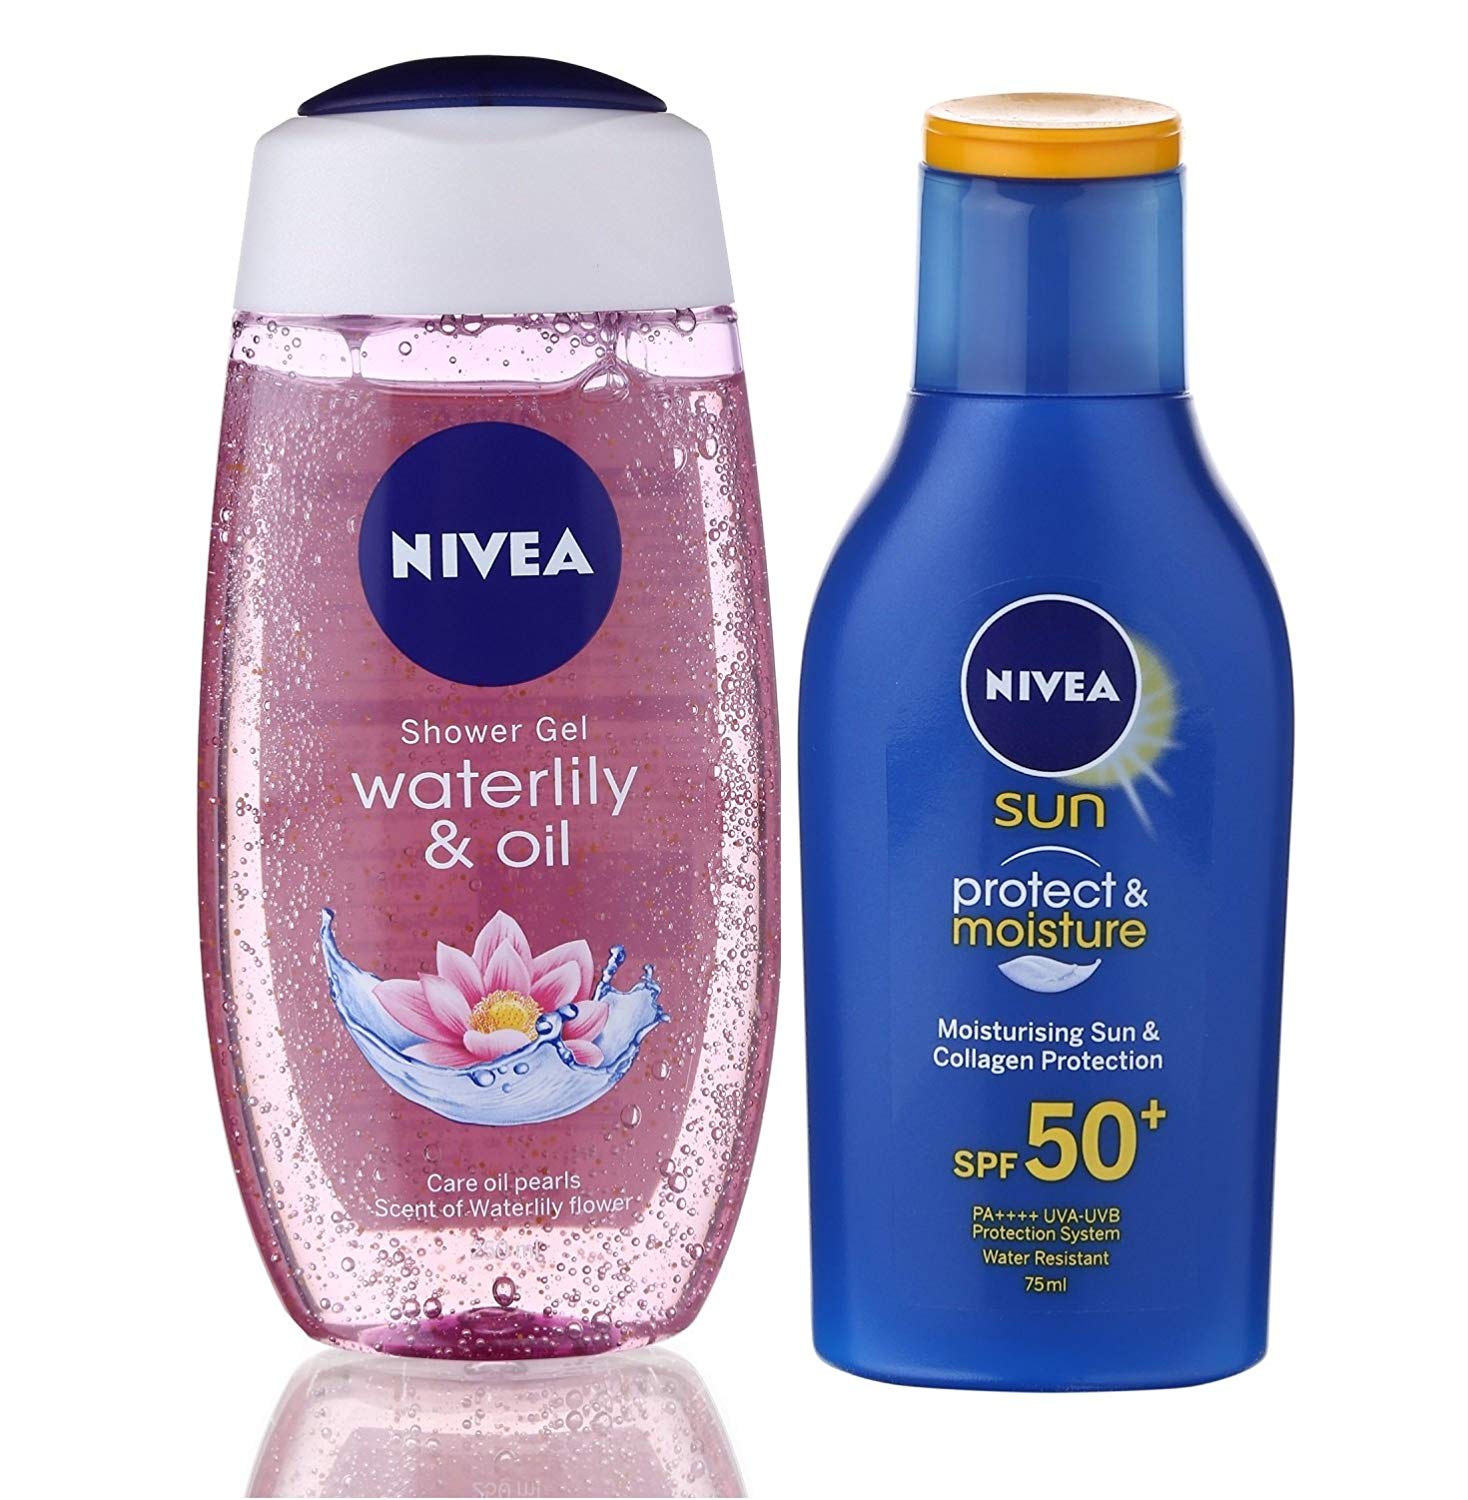 Nivea Sun and Shower Combo (Moisturising Sun Lotion SPF 50, 75ml and Waterlily and Oil Shower Gel, 250ml)